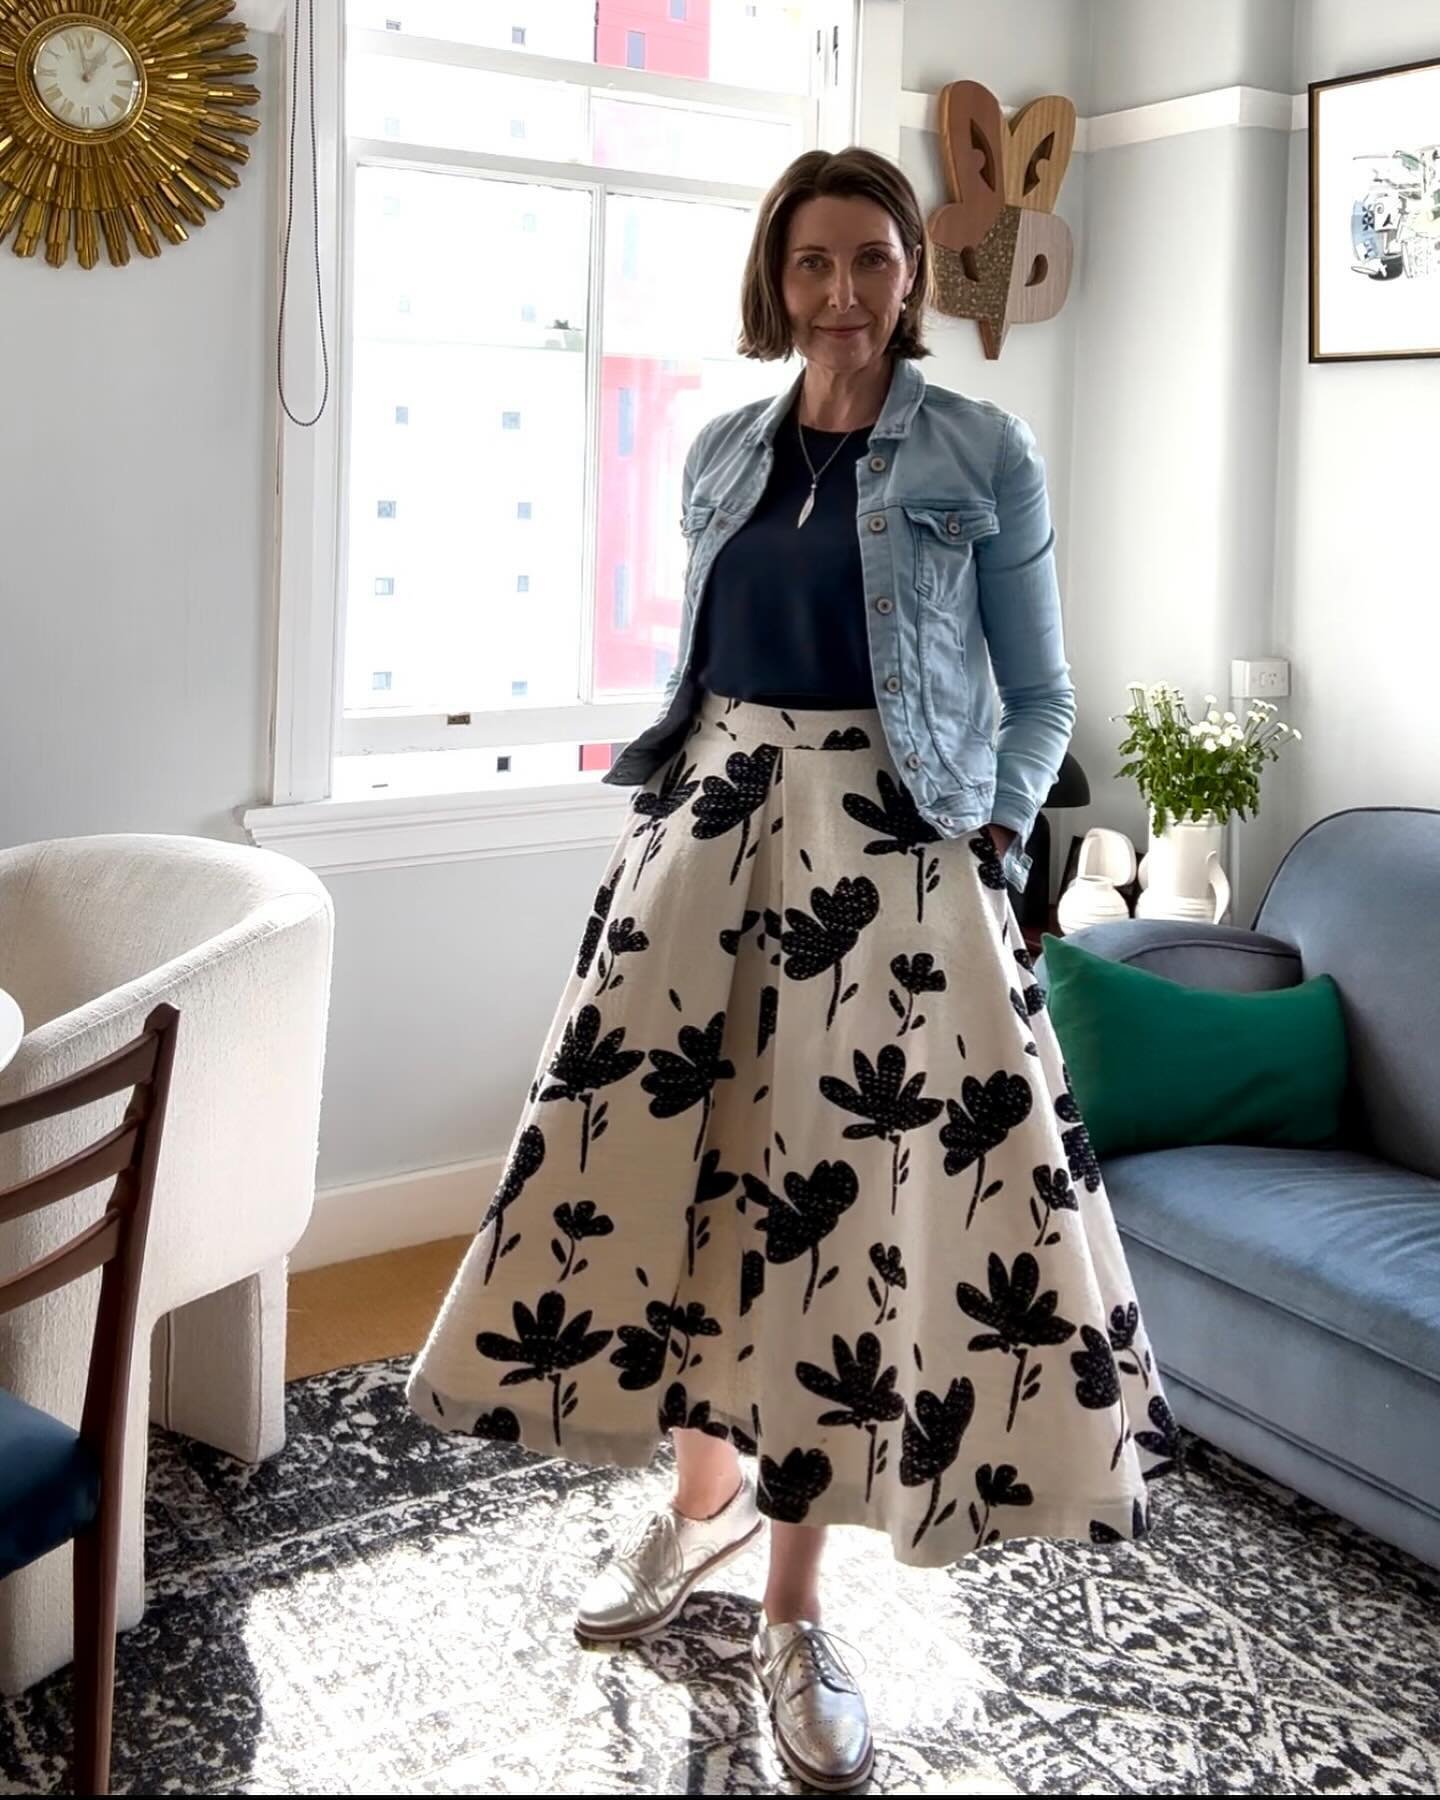 Today&rsquo;s outfit is a good example of falling back in love with clothes already in the wardrobe. This fabulously voluminous skirt is one I made 5 years ago (love the weighty swing of it and the pockets!) The silk top I&rsquo;ve owned for at least